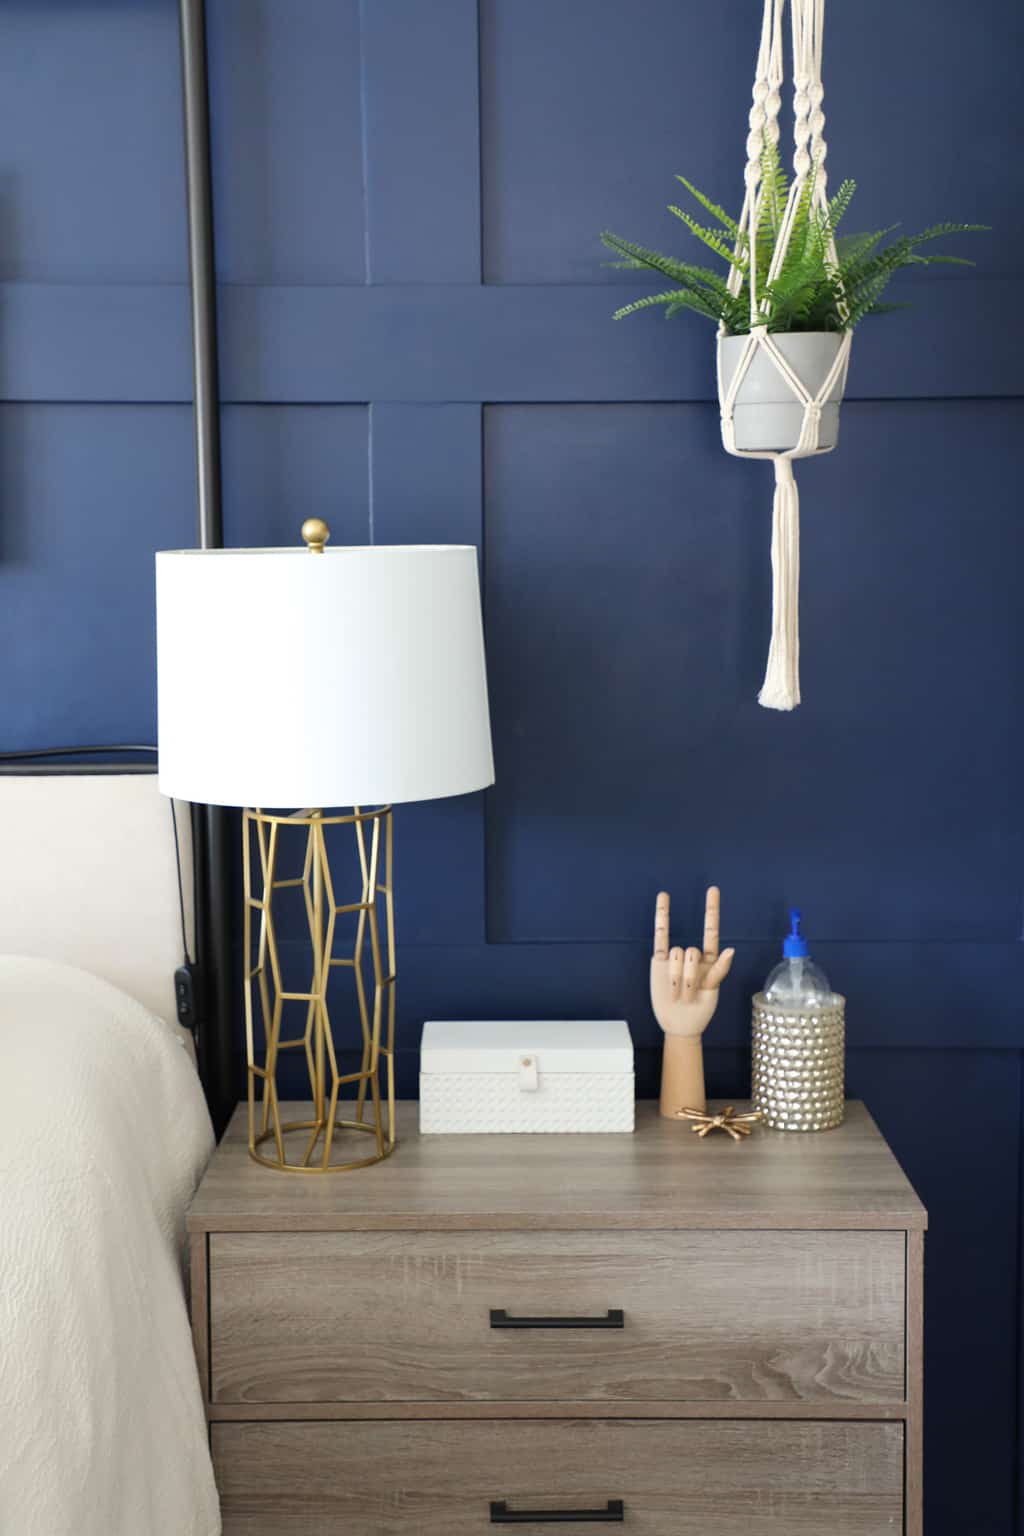 a decorated nightstand in front of the blue accent wall